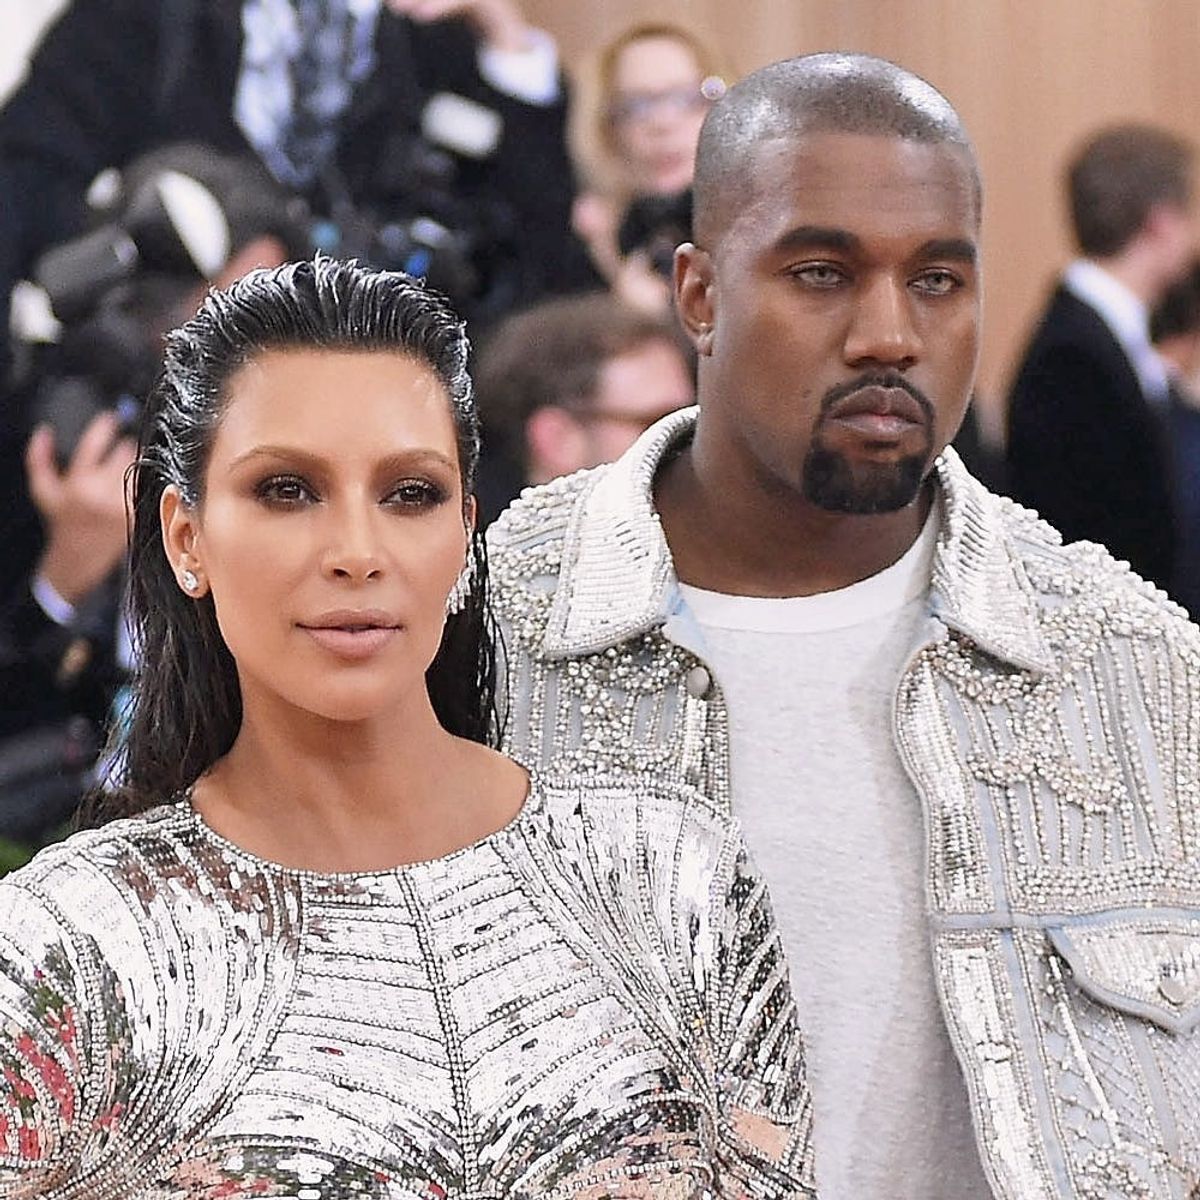 Kim K Wants the Final Word in the Taylor Swift vs. Kanye Feud